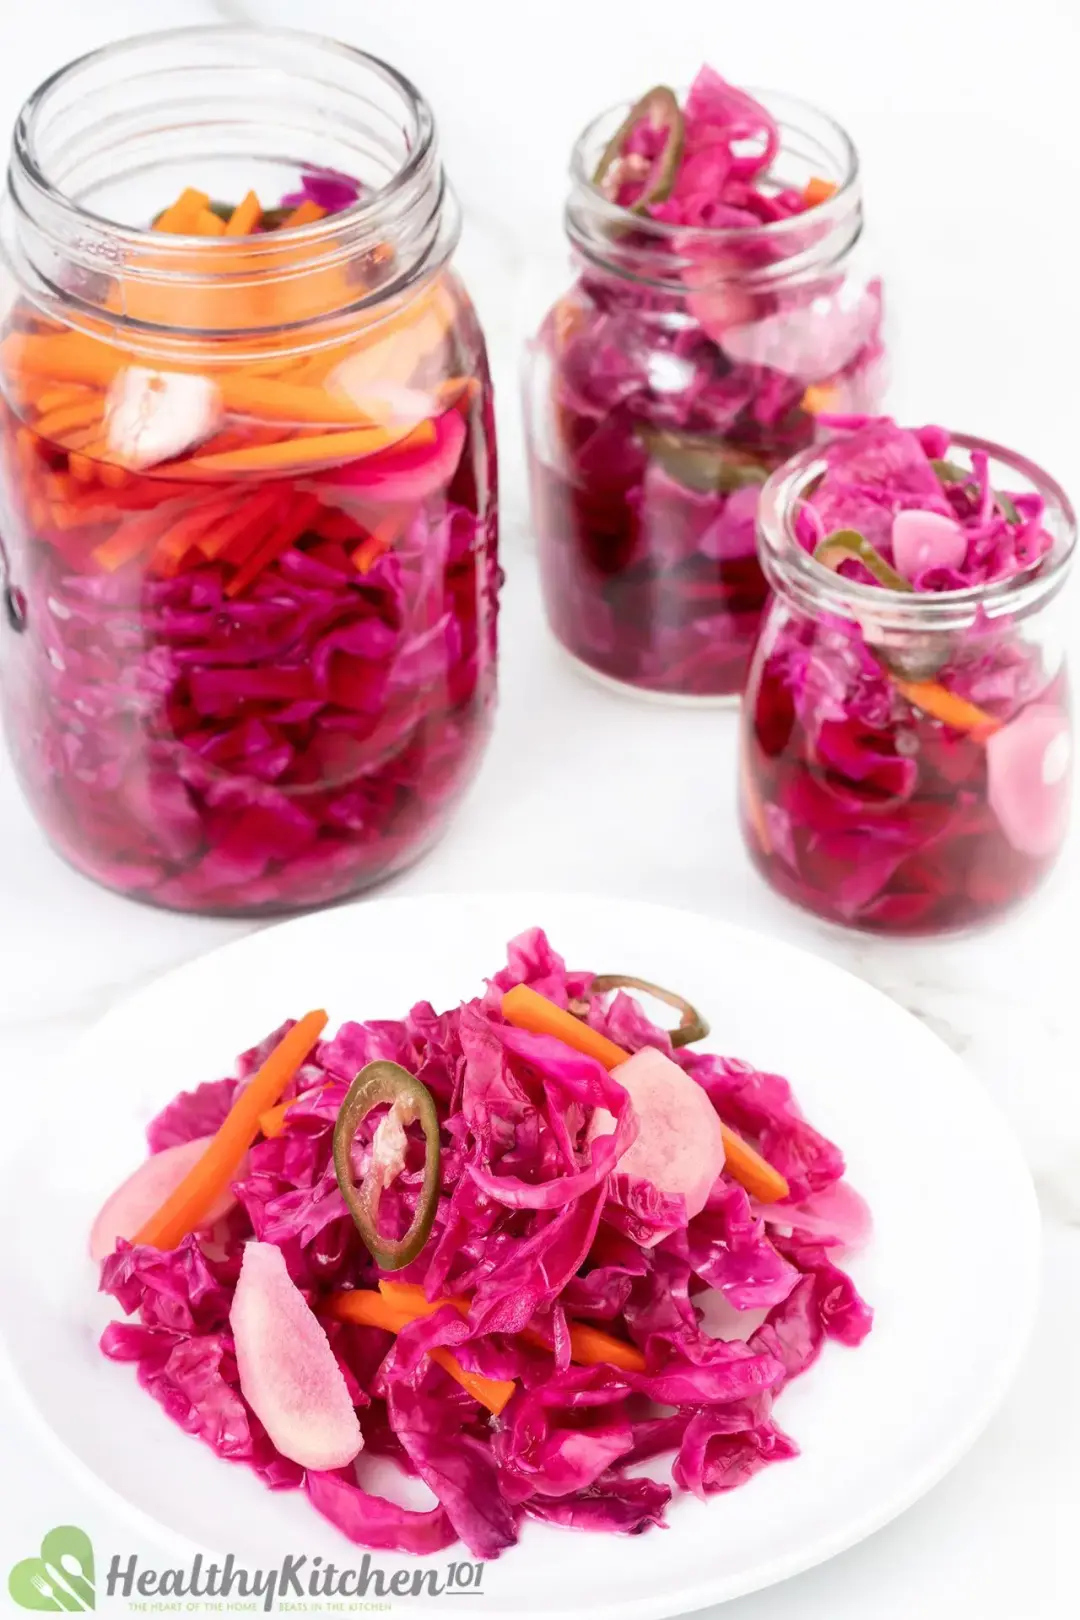 What Do You Eat with Pickled Red Cabbage